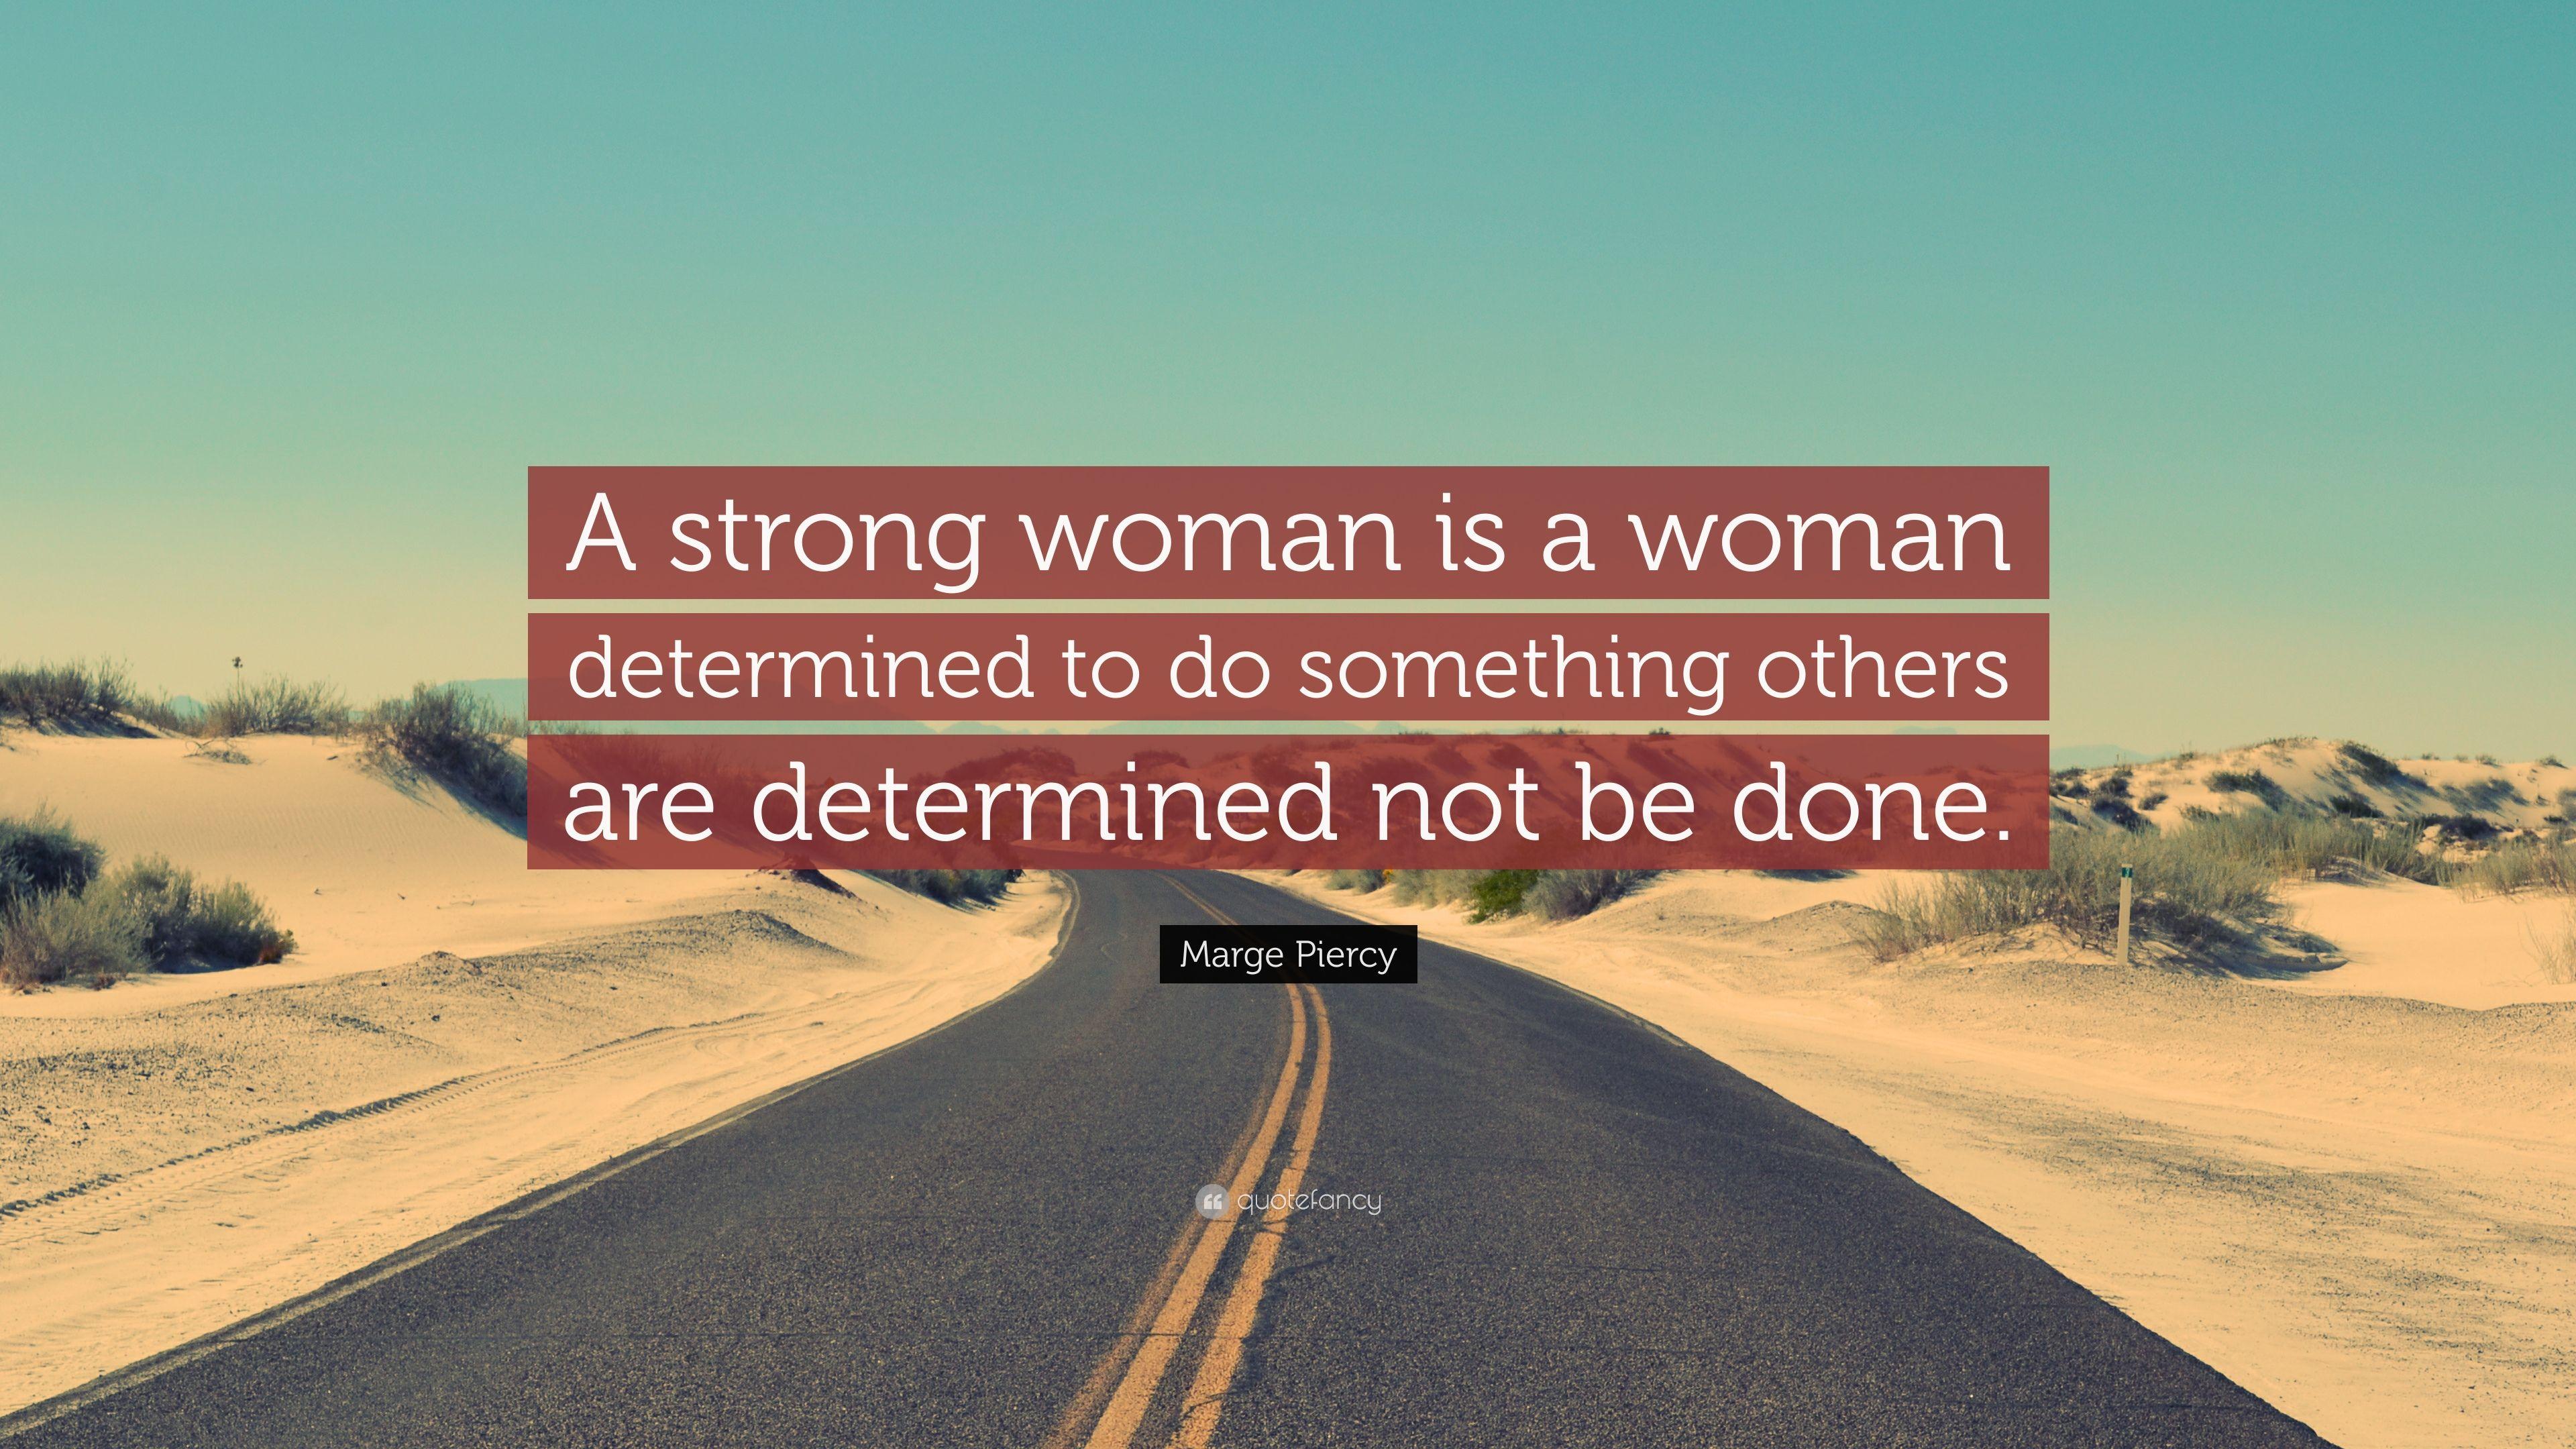 Marge Piercy Quote: “A strong woman is a woman determined to do